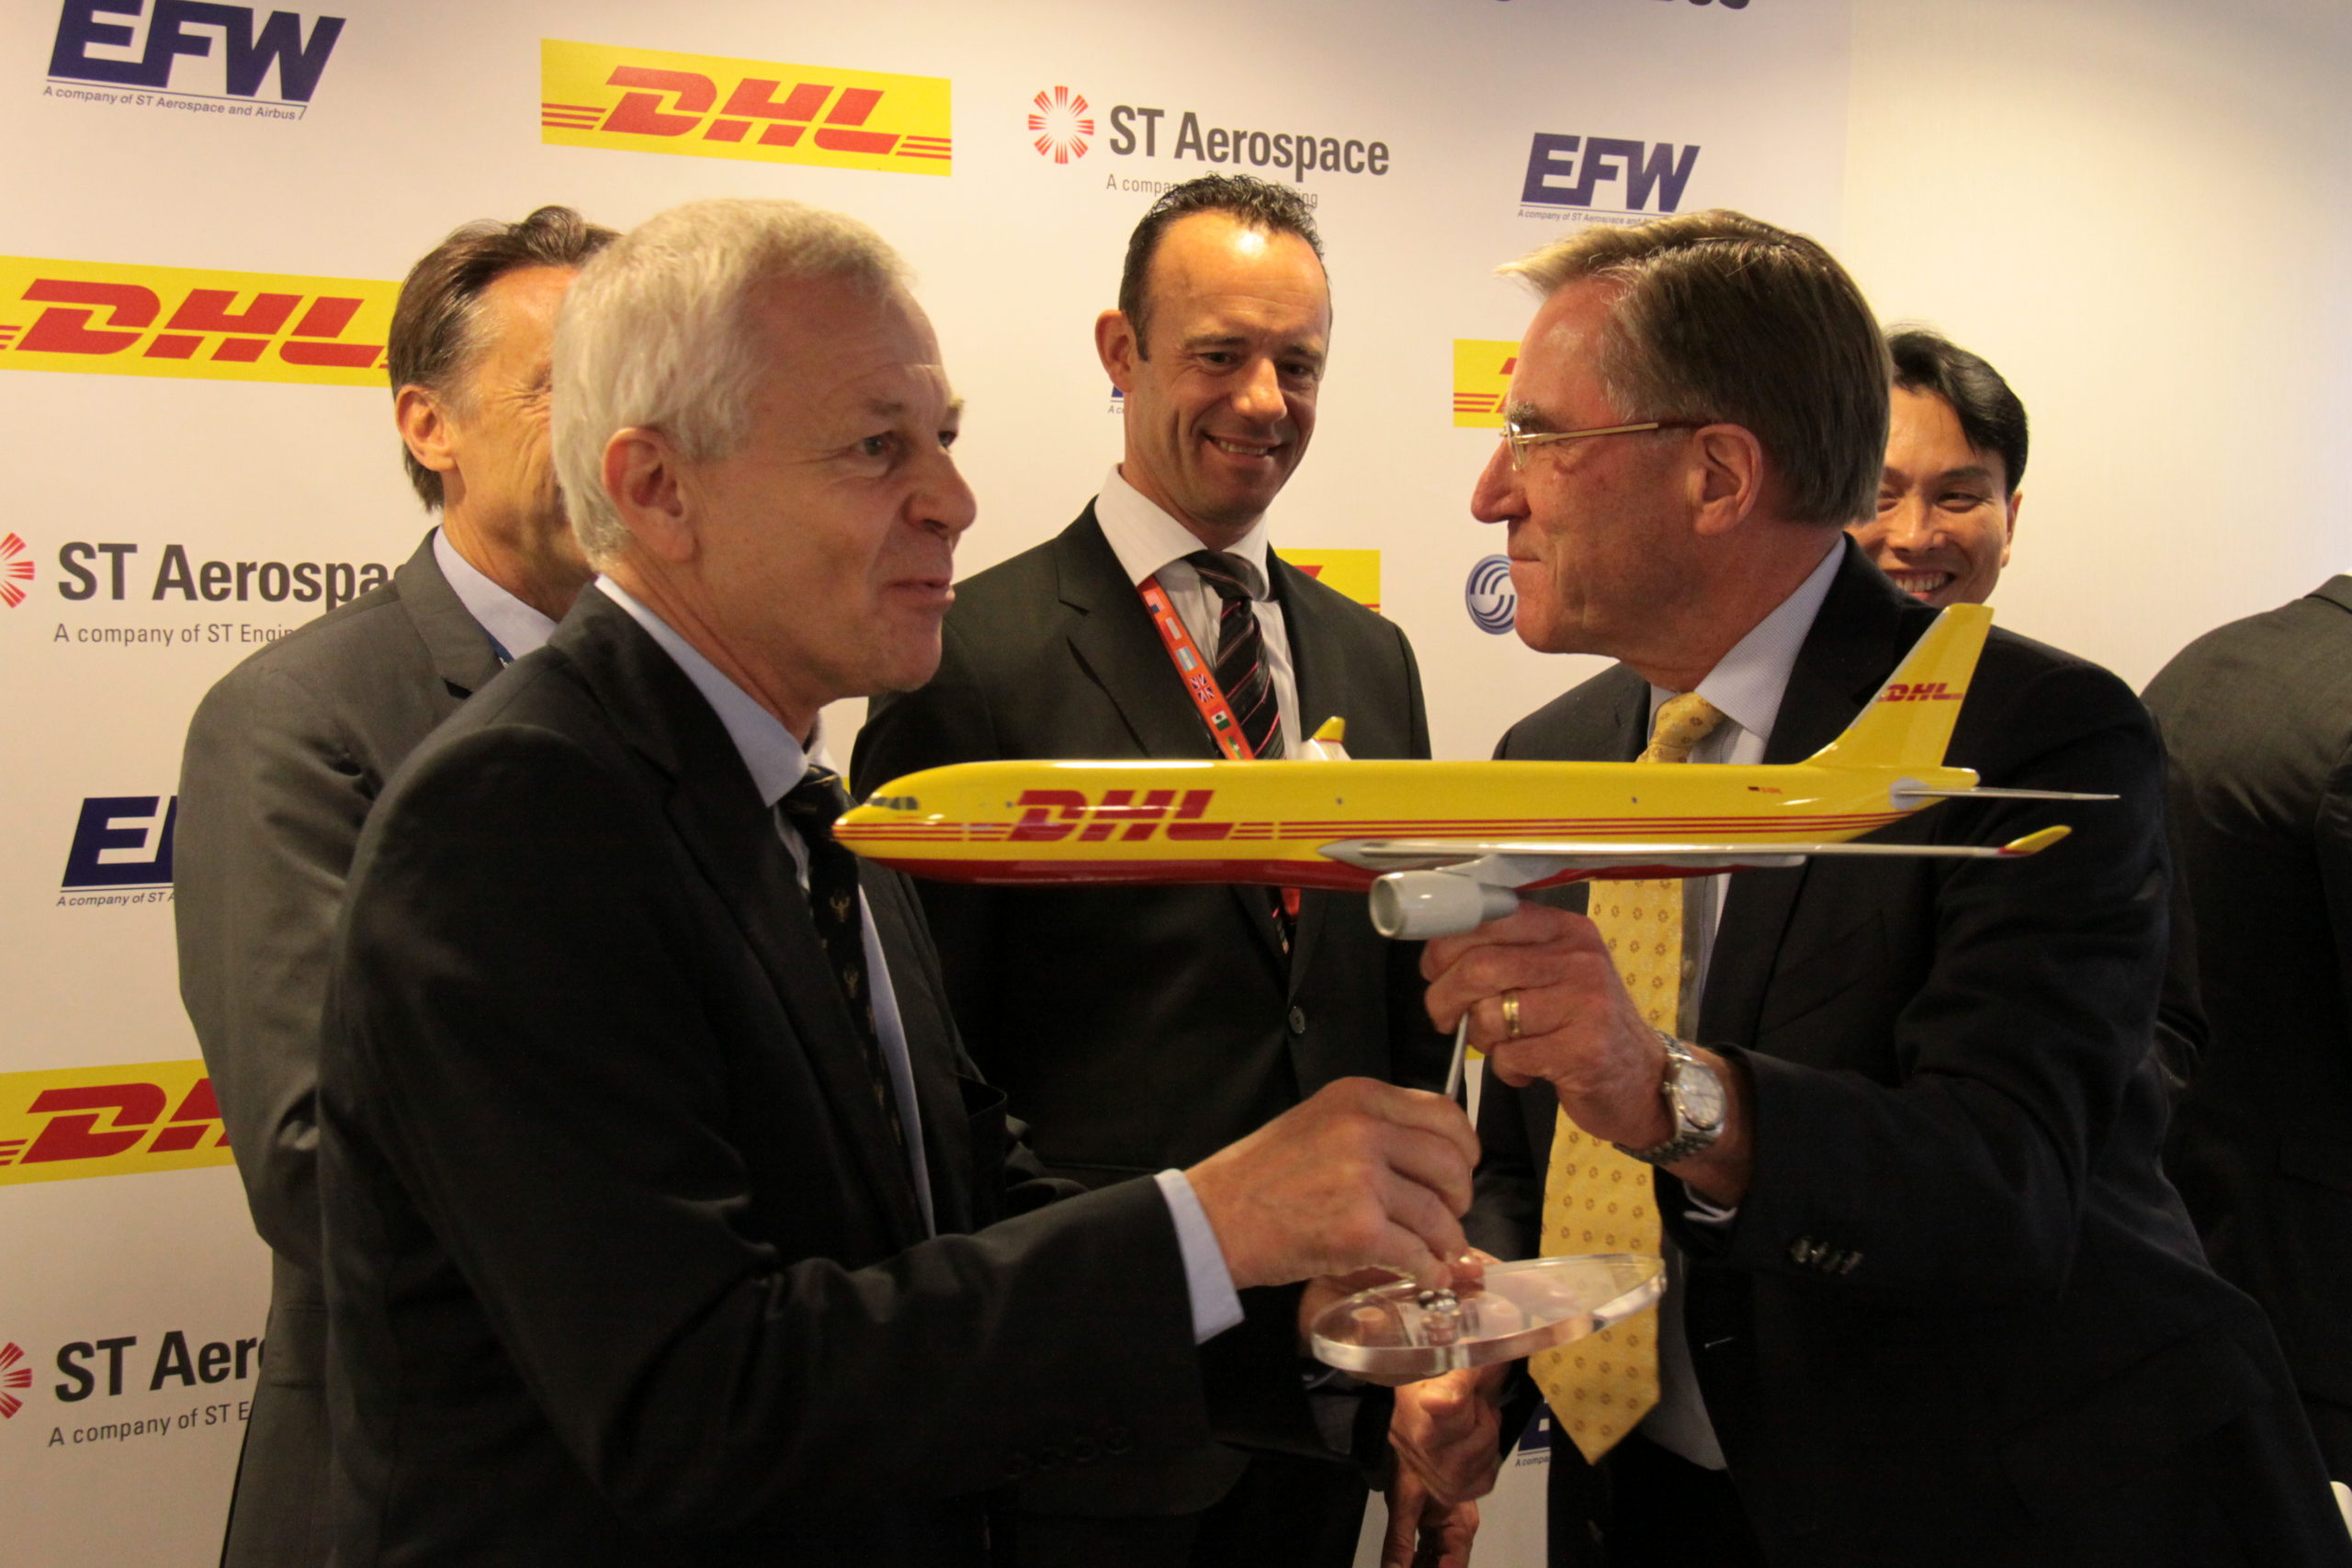 DHL is the launch customer for EFW's A330-300 P-to-F programs. Here, DHL's Geoff Kehr accepts a model of the A330-300P2F from EFW's Andreas Sperl.